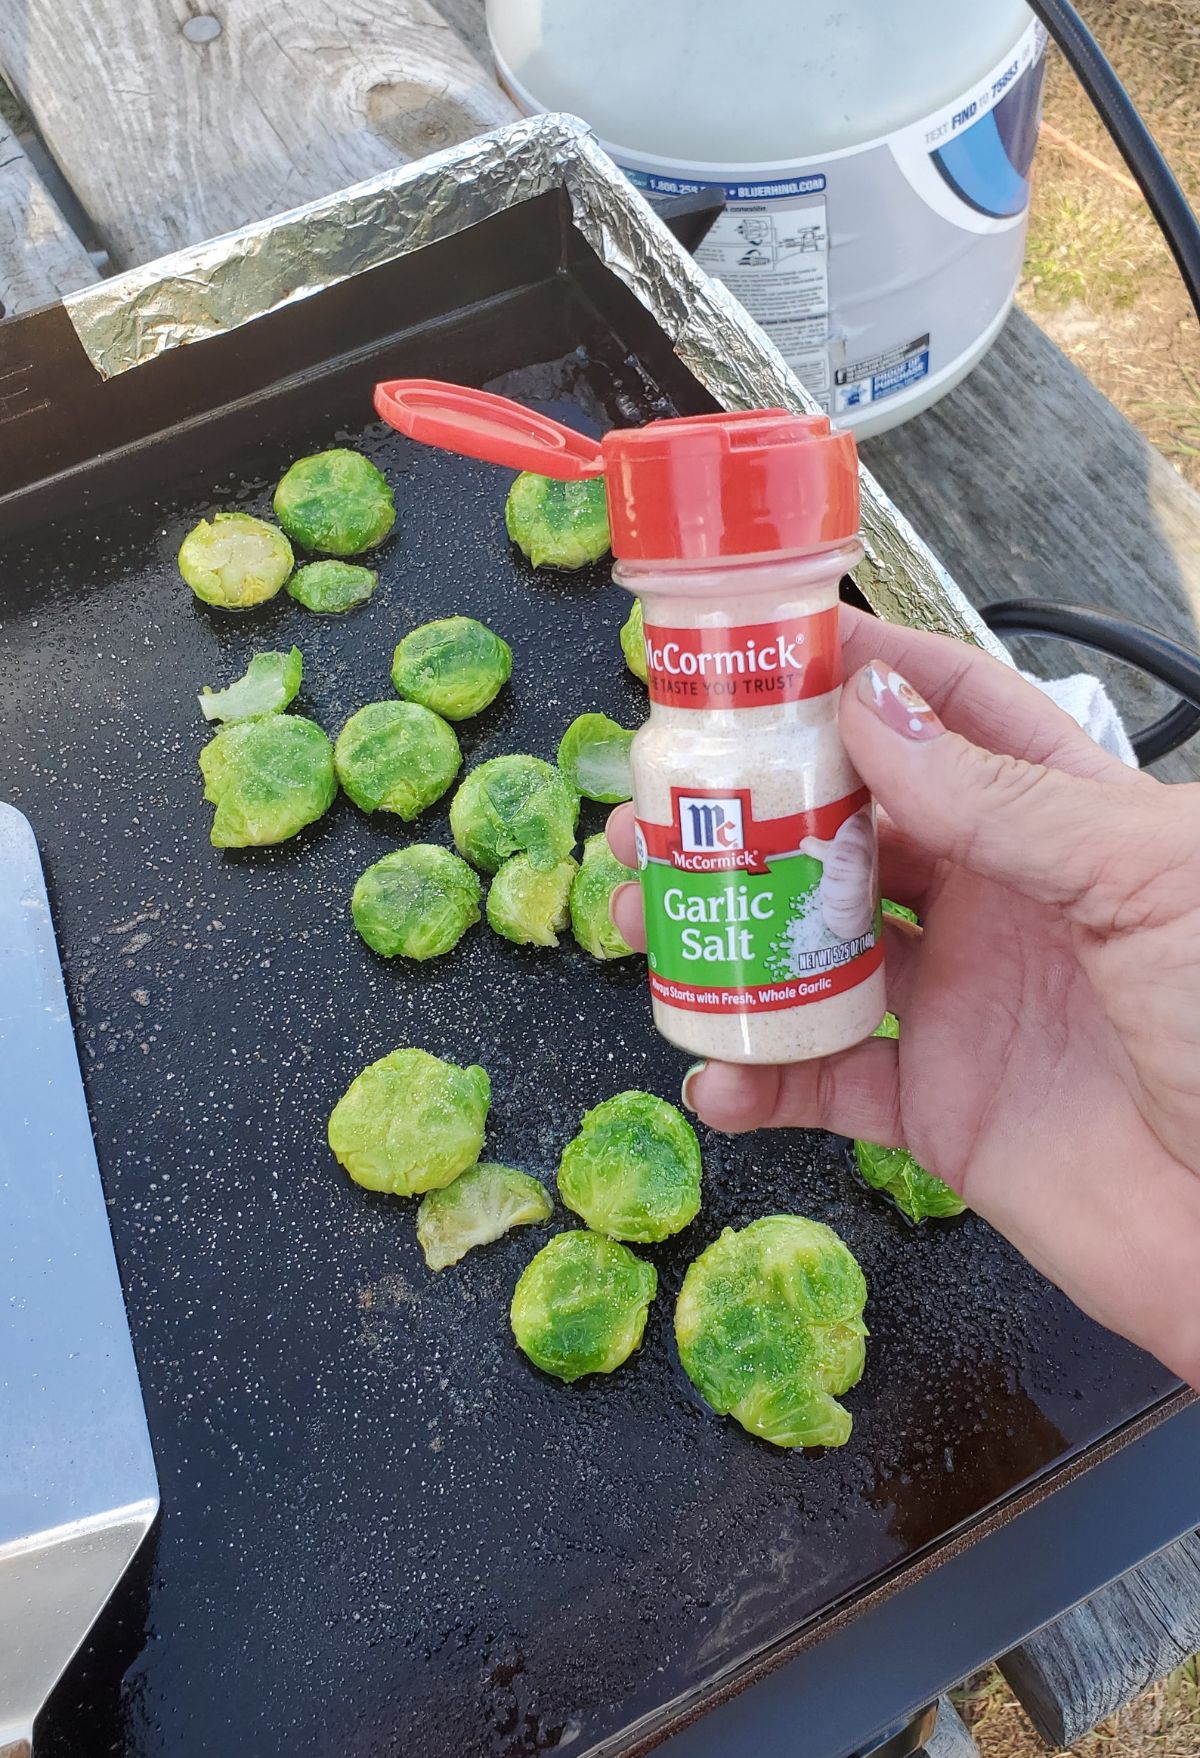 Brussel sprouts on a grill with a bottle of seasoning.